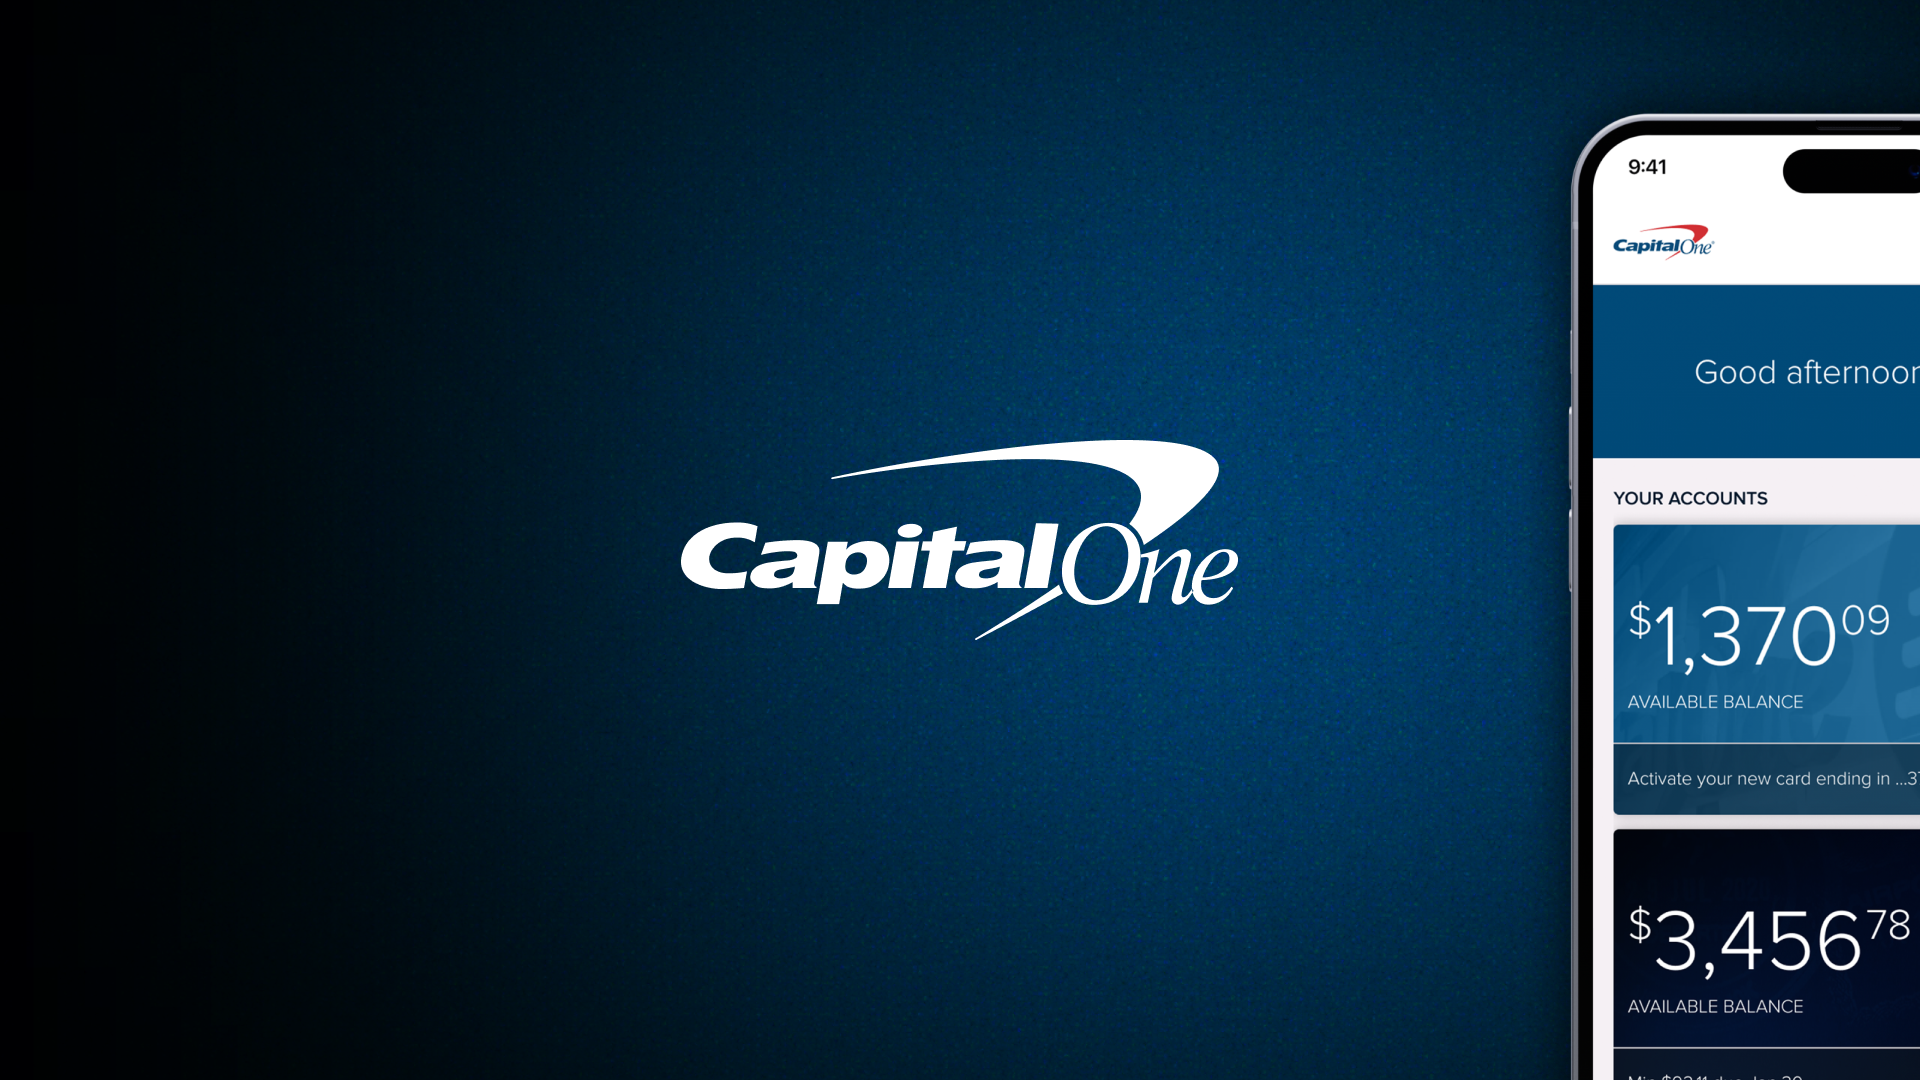 Capital One - Overview